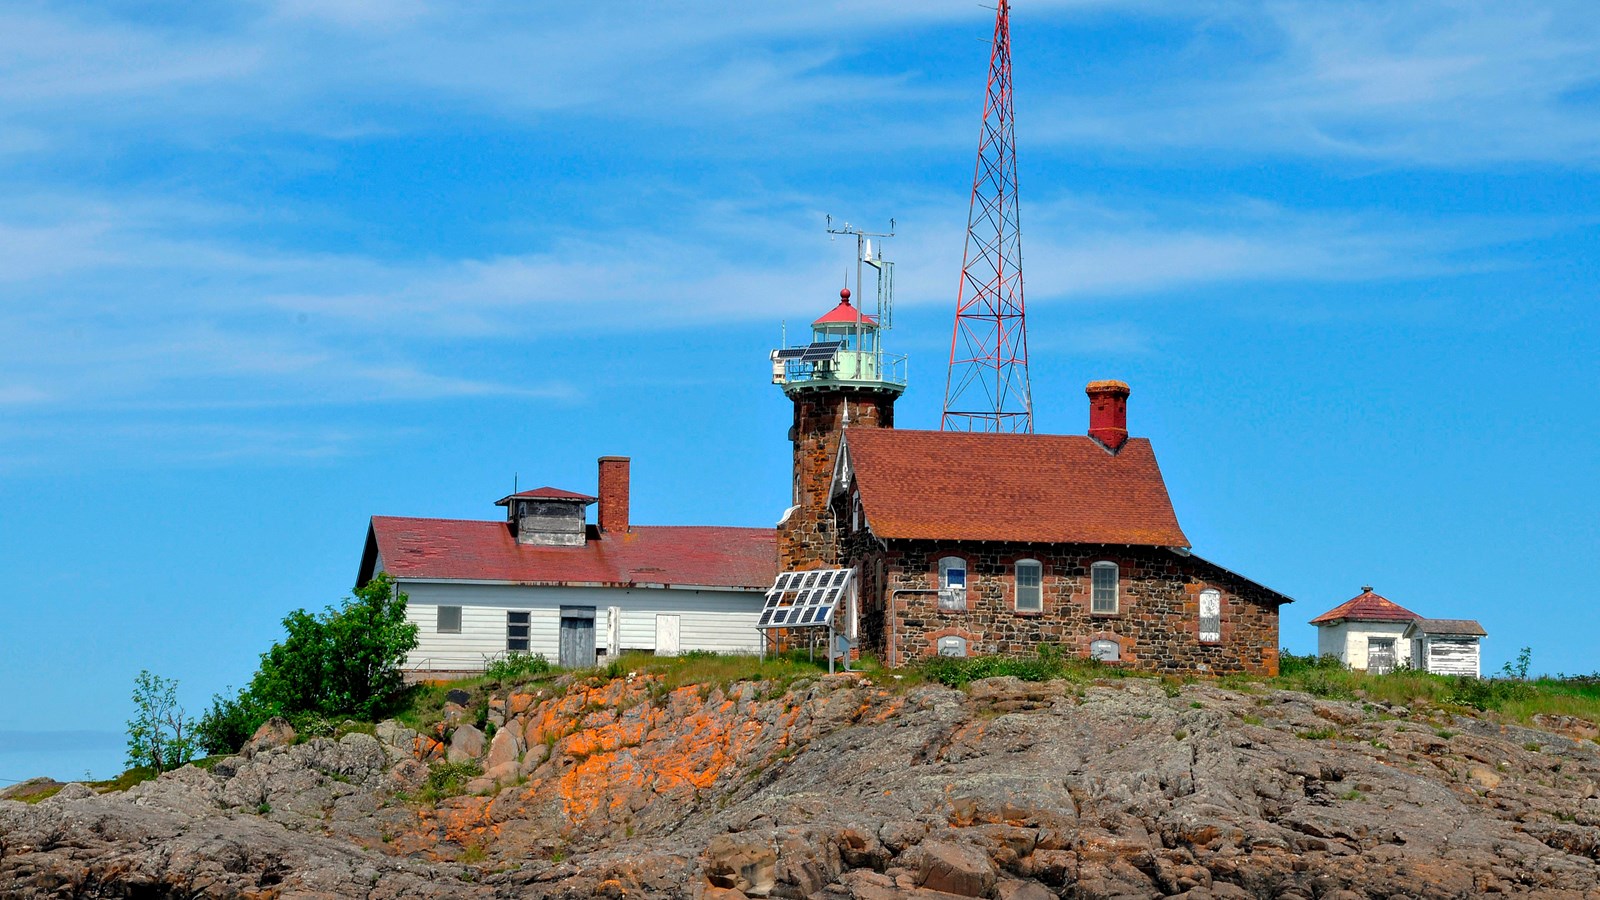 lighthouse, communication tower, and garage structure on a rocky island